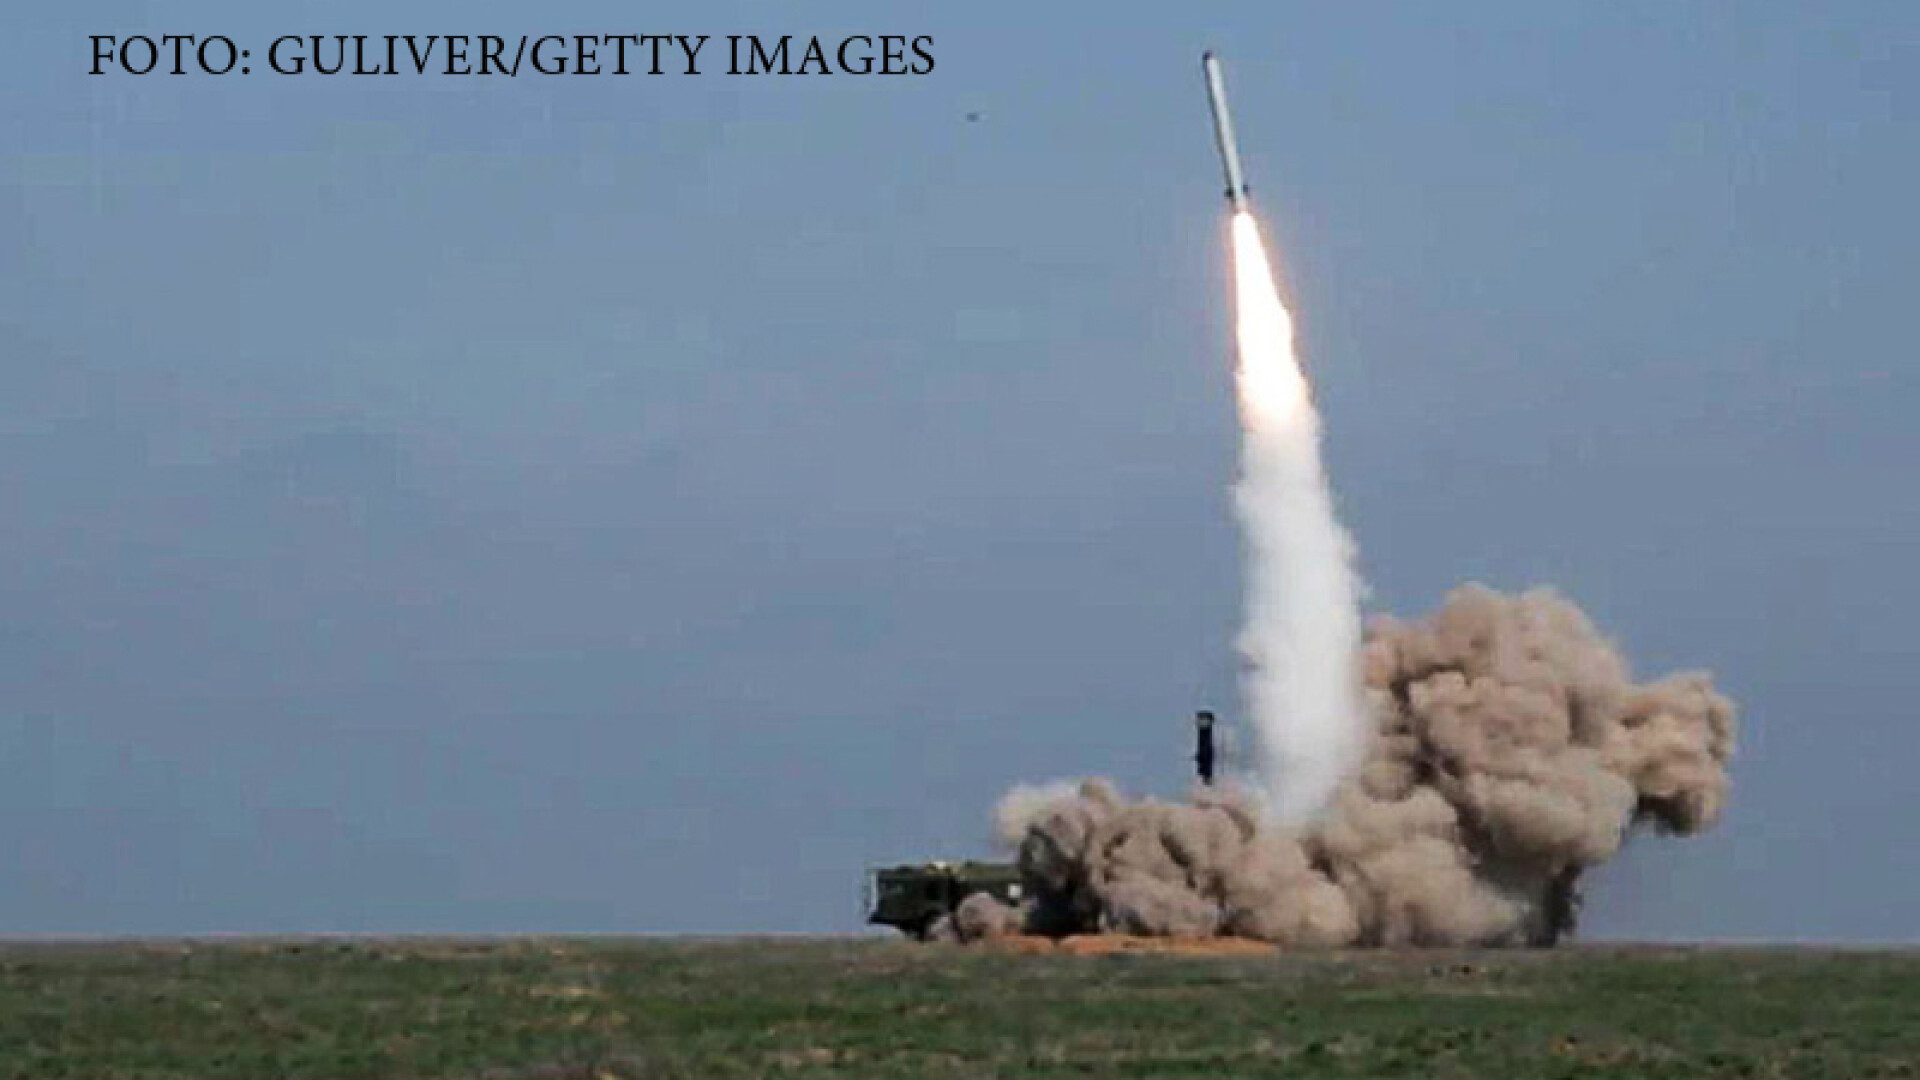 launch of a missile from an Iskander M tactical missile system at Kapustin Yar during a military exercise by the Russian Armed Forces